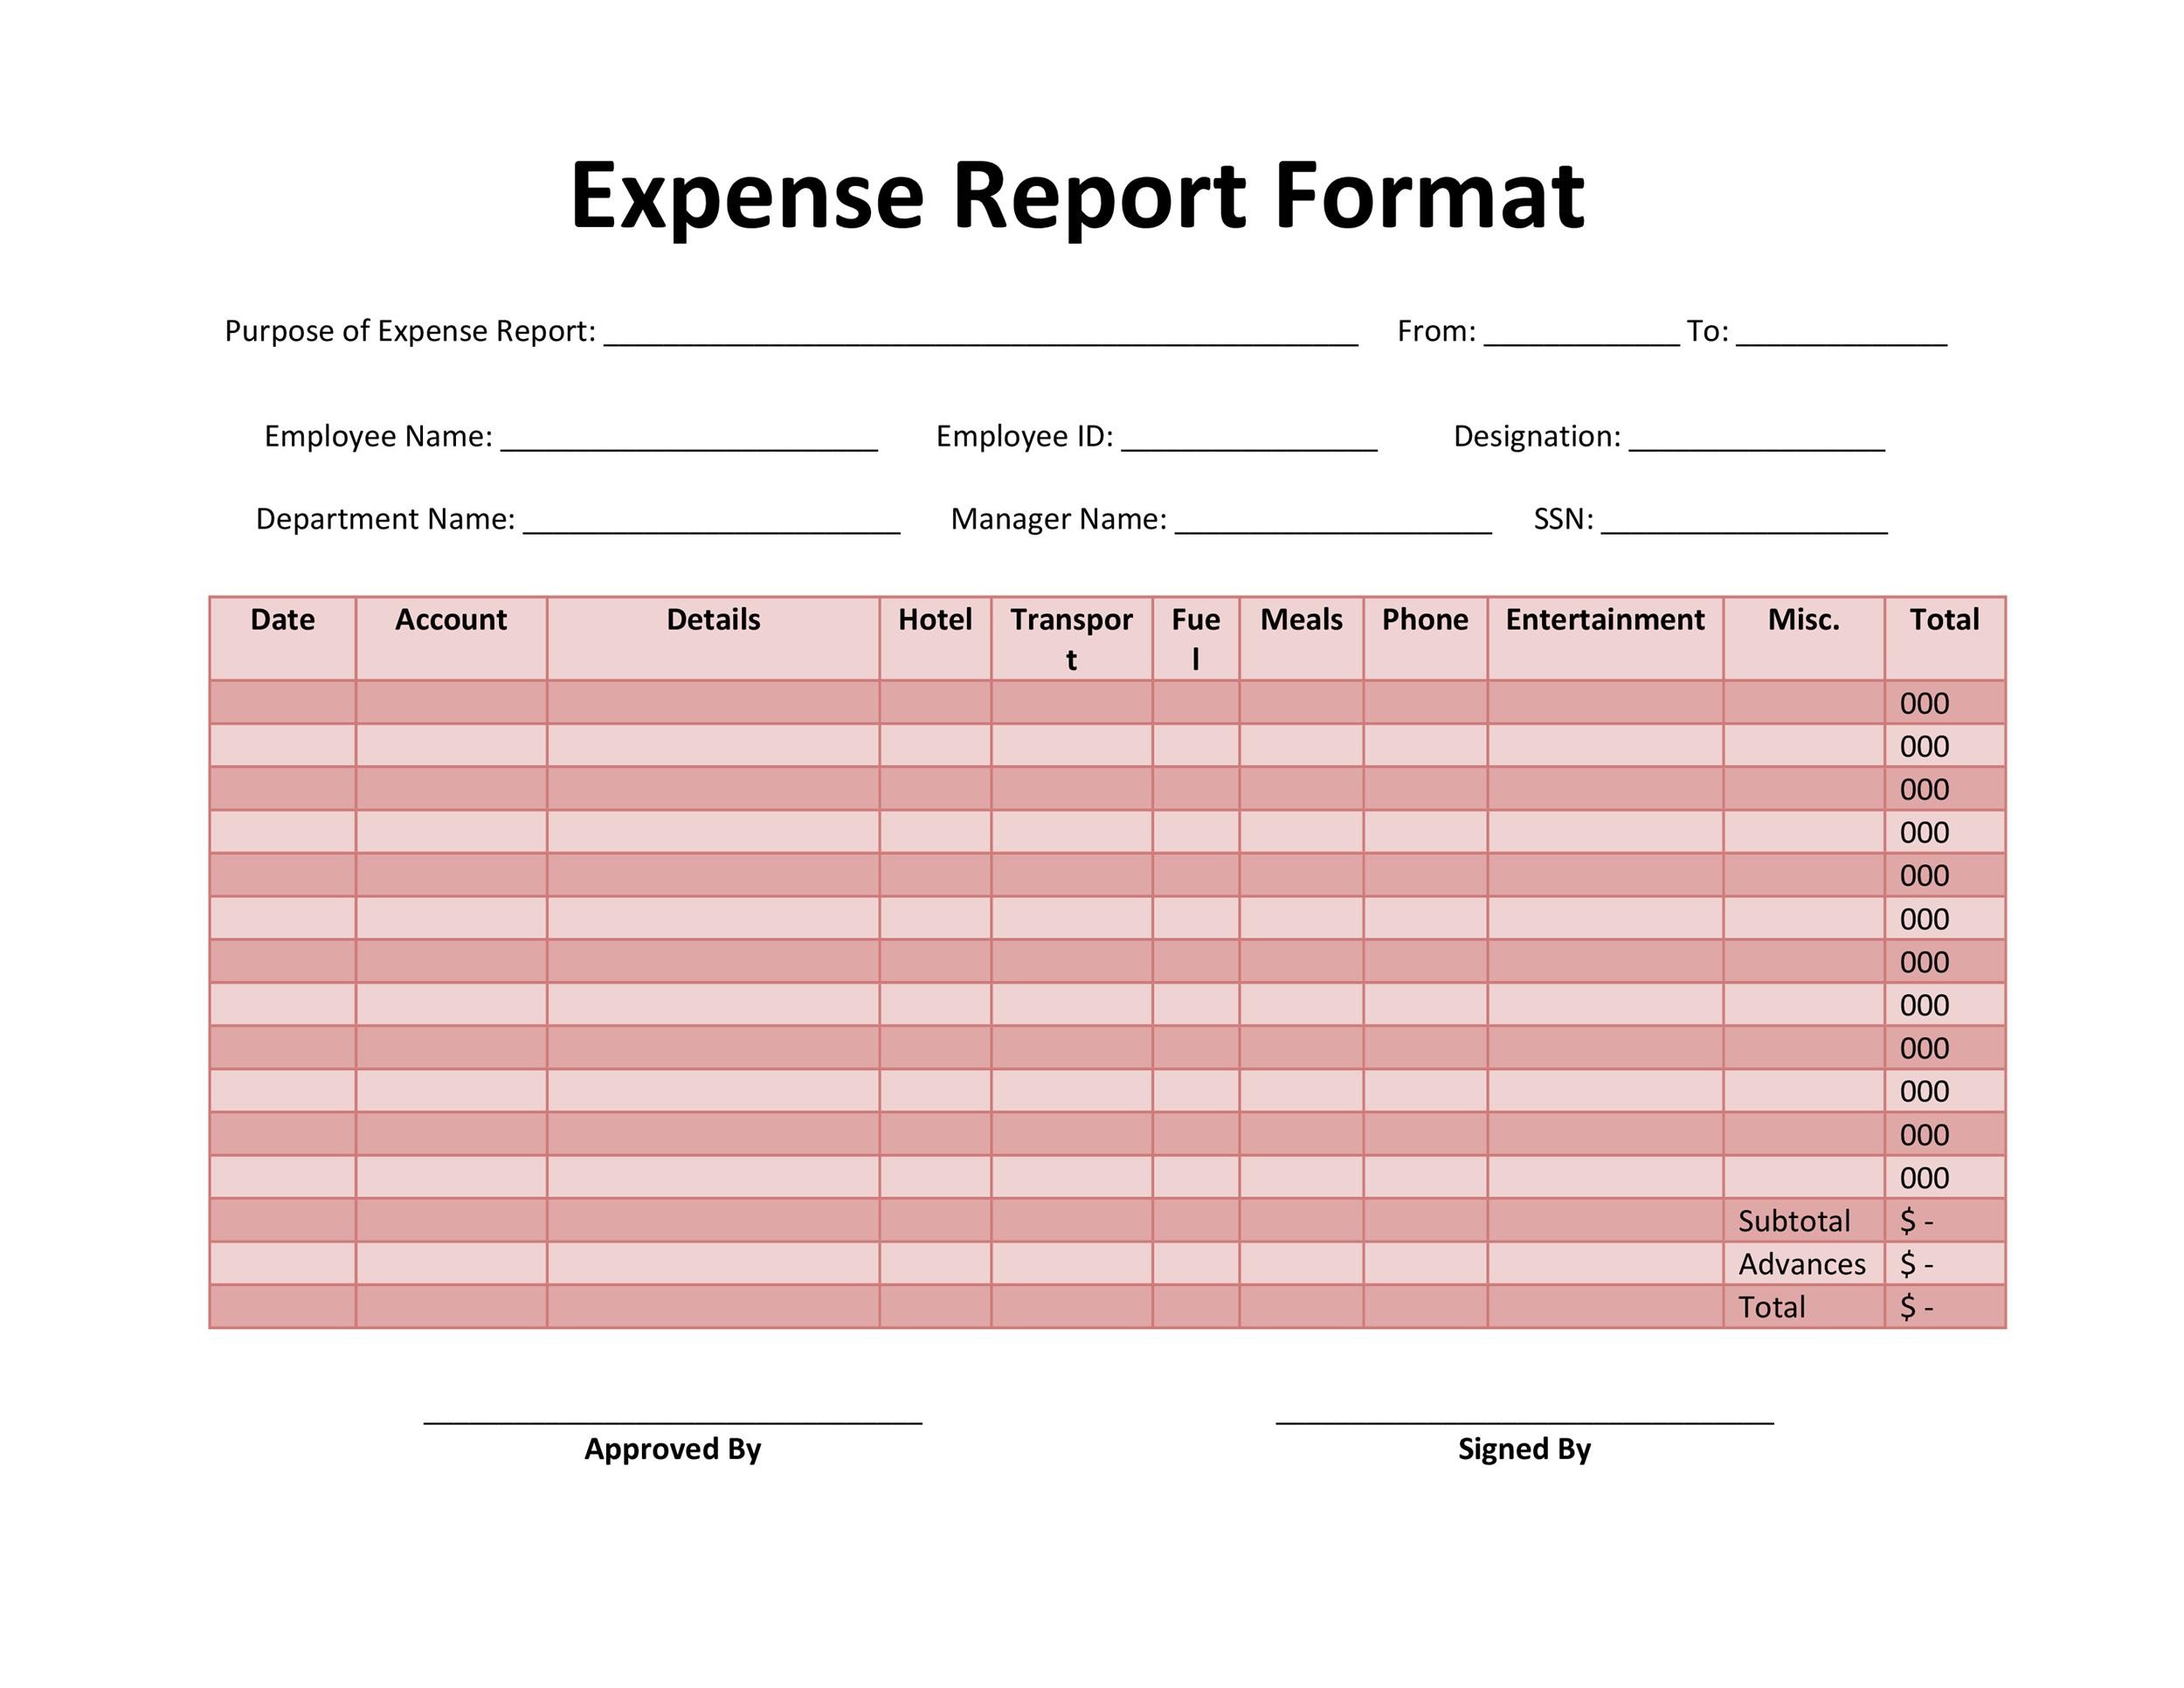 Excel Expense Report Template Free from templatelab.com